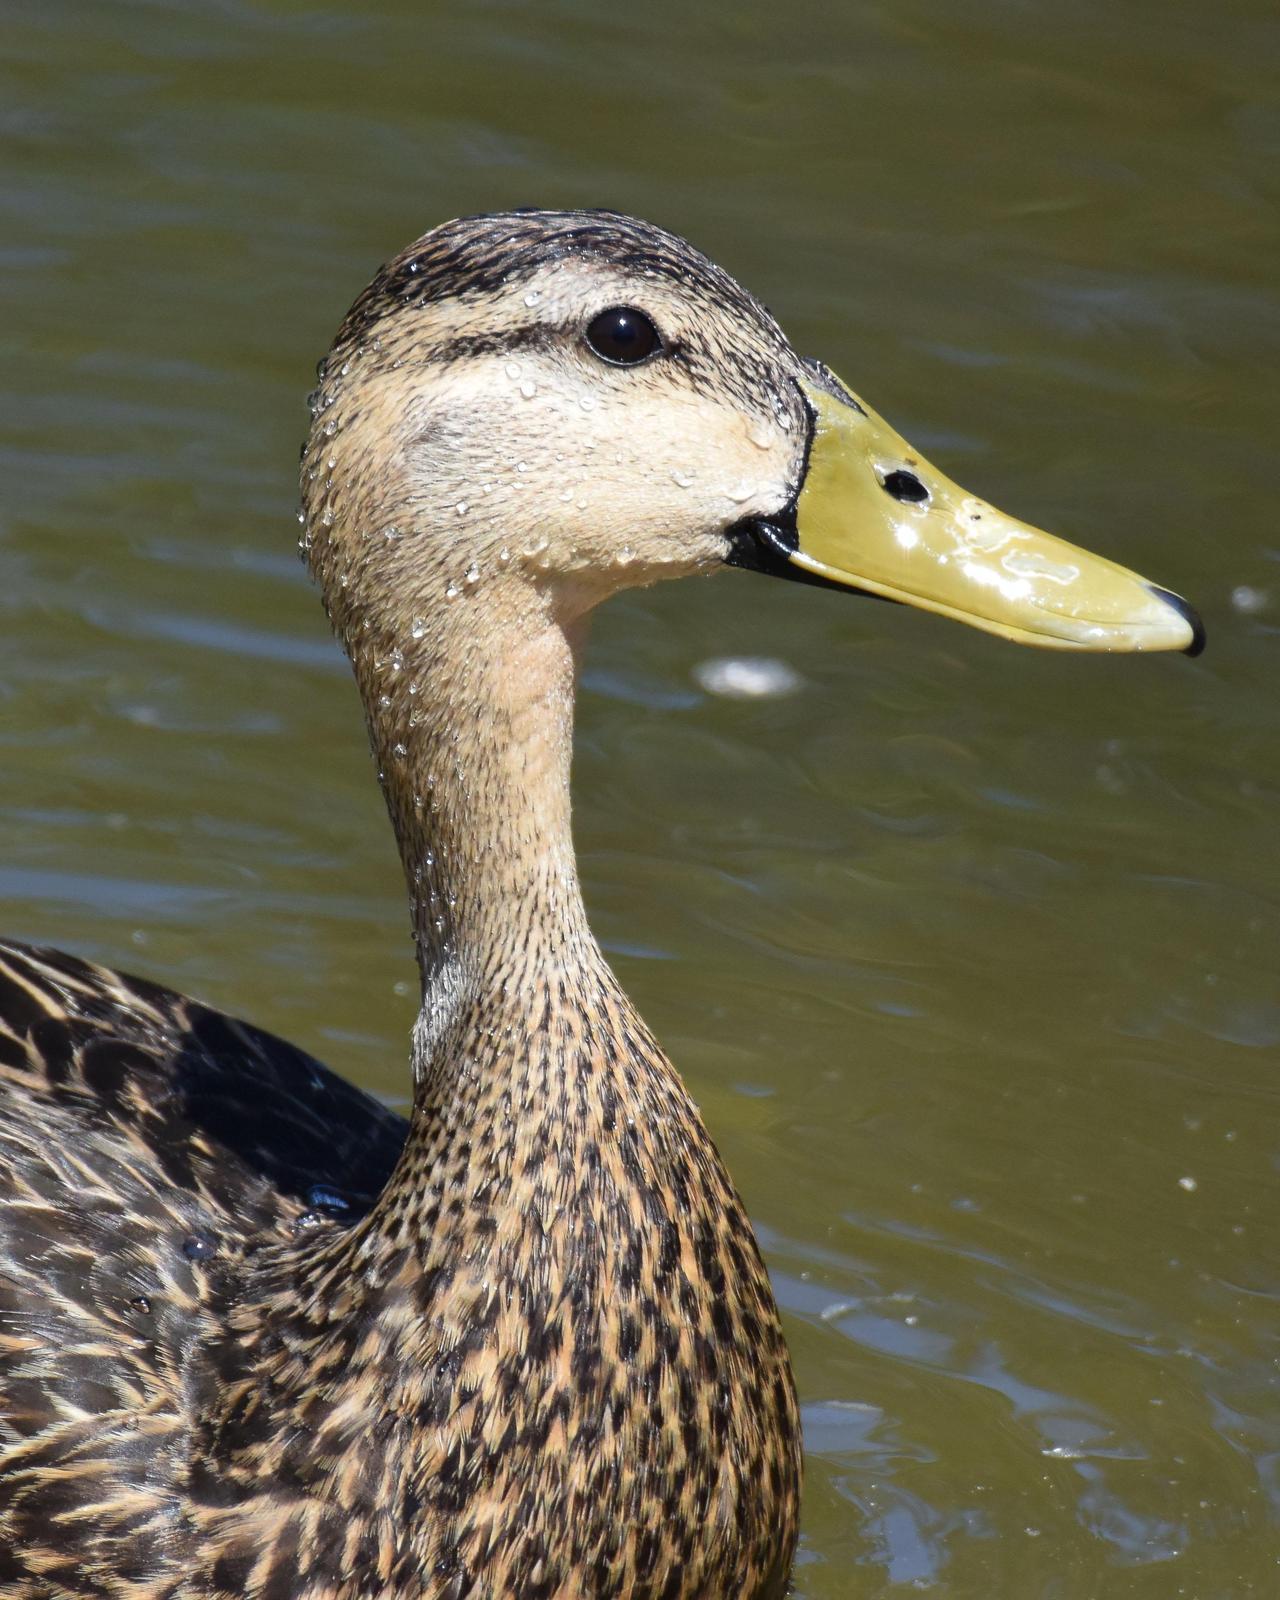 Mottled Duck (Florida) Photo by Emily Percival